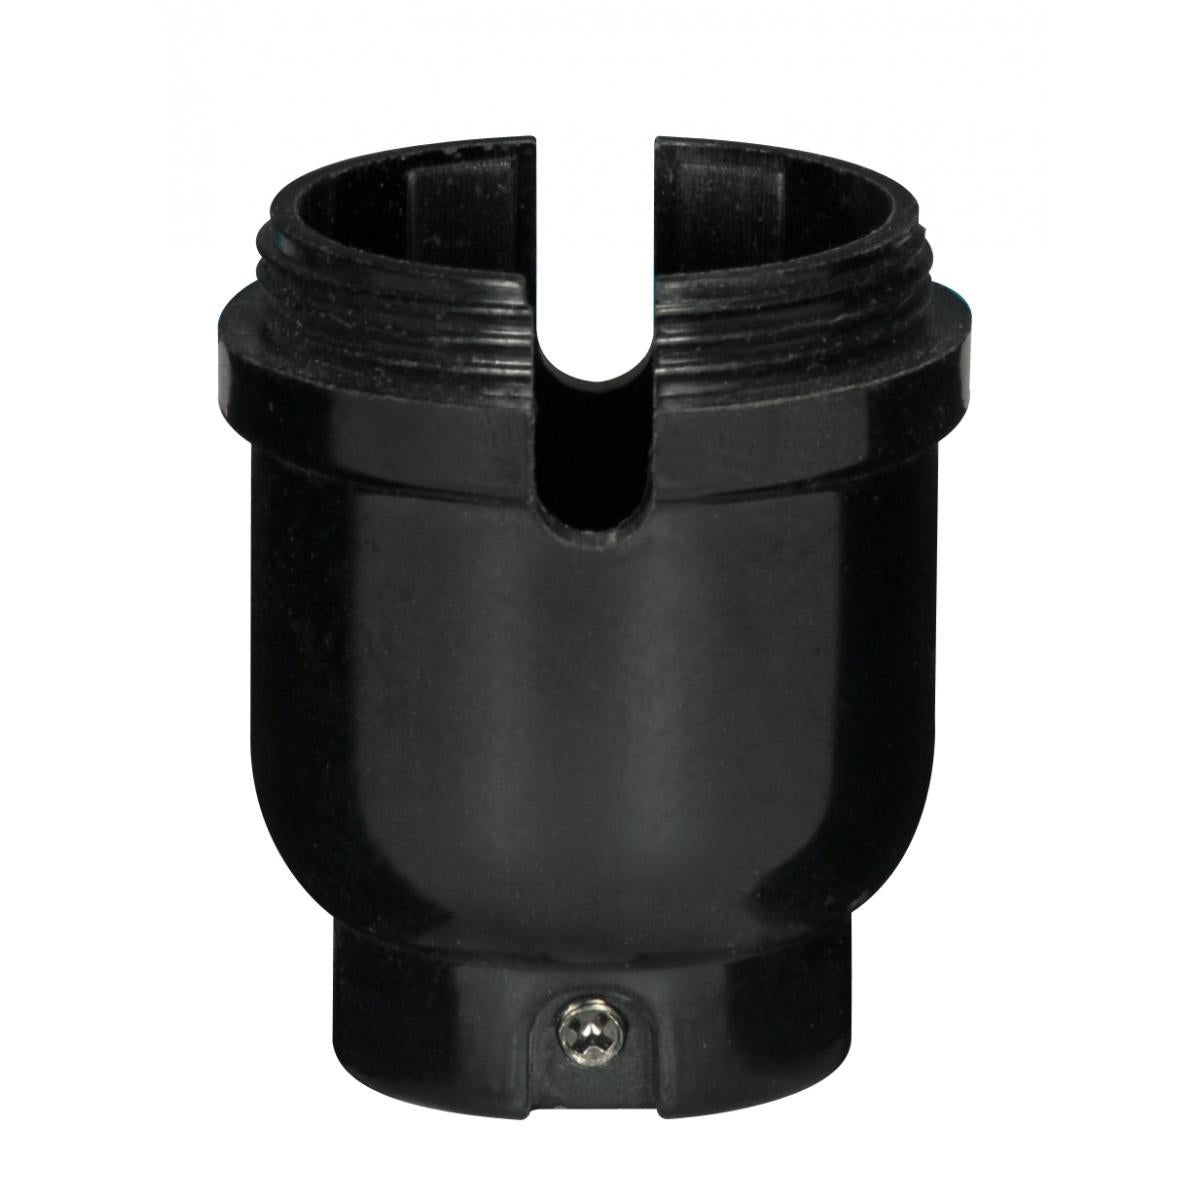 Satco 80-2150 1/4 IP Cap Only Phenolic 1/2 Uno Thread With Metal Bushing With Set Screw For Push Thru